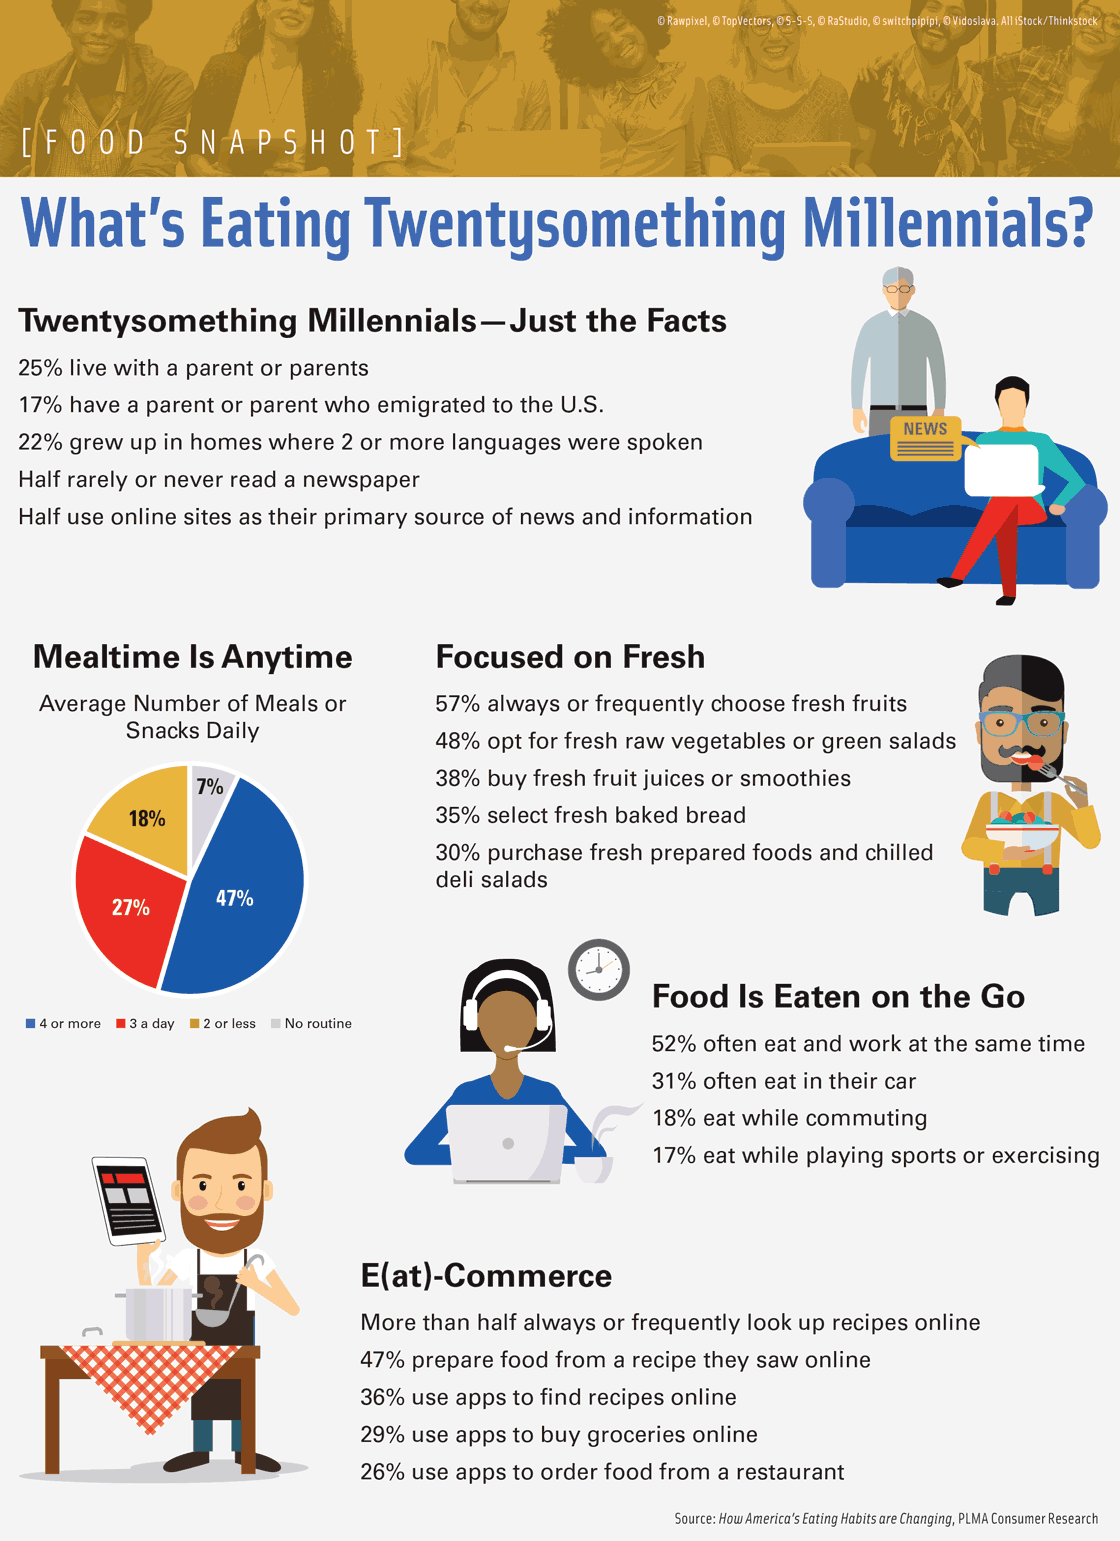 What’s Eating Twentysomething Millennials? Source: How America’s Eating Habits are Changing, PLMA Consumer Research